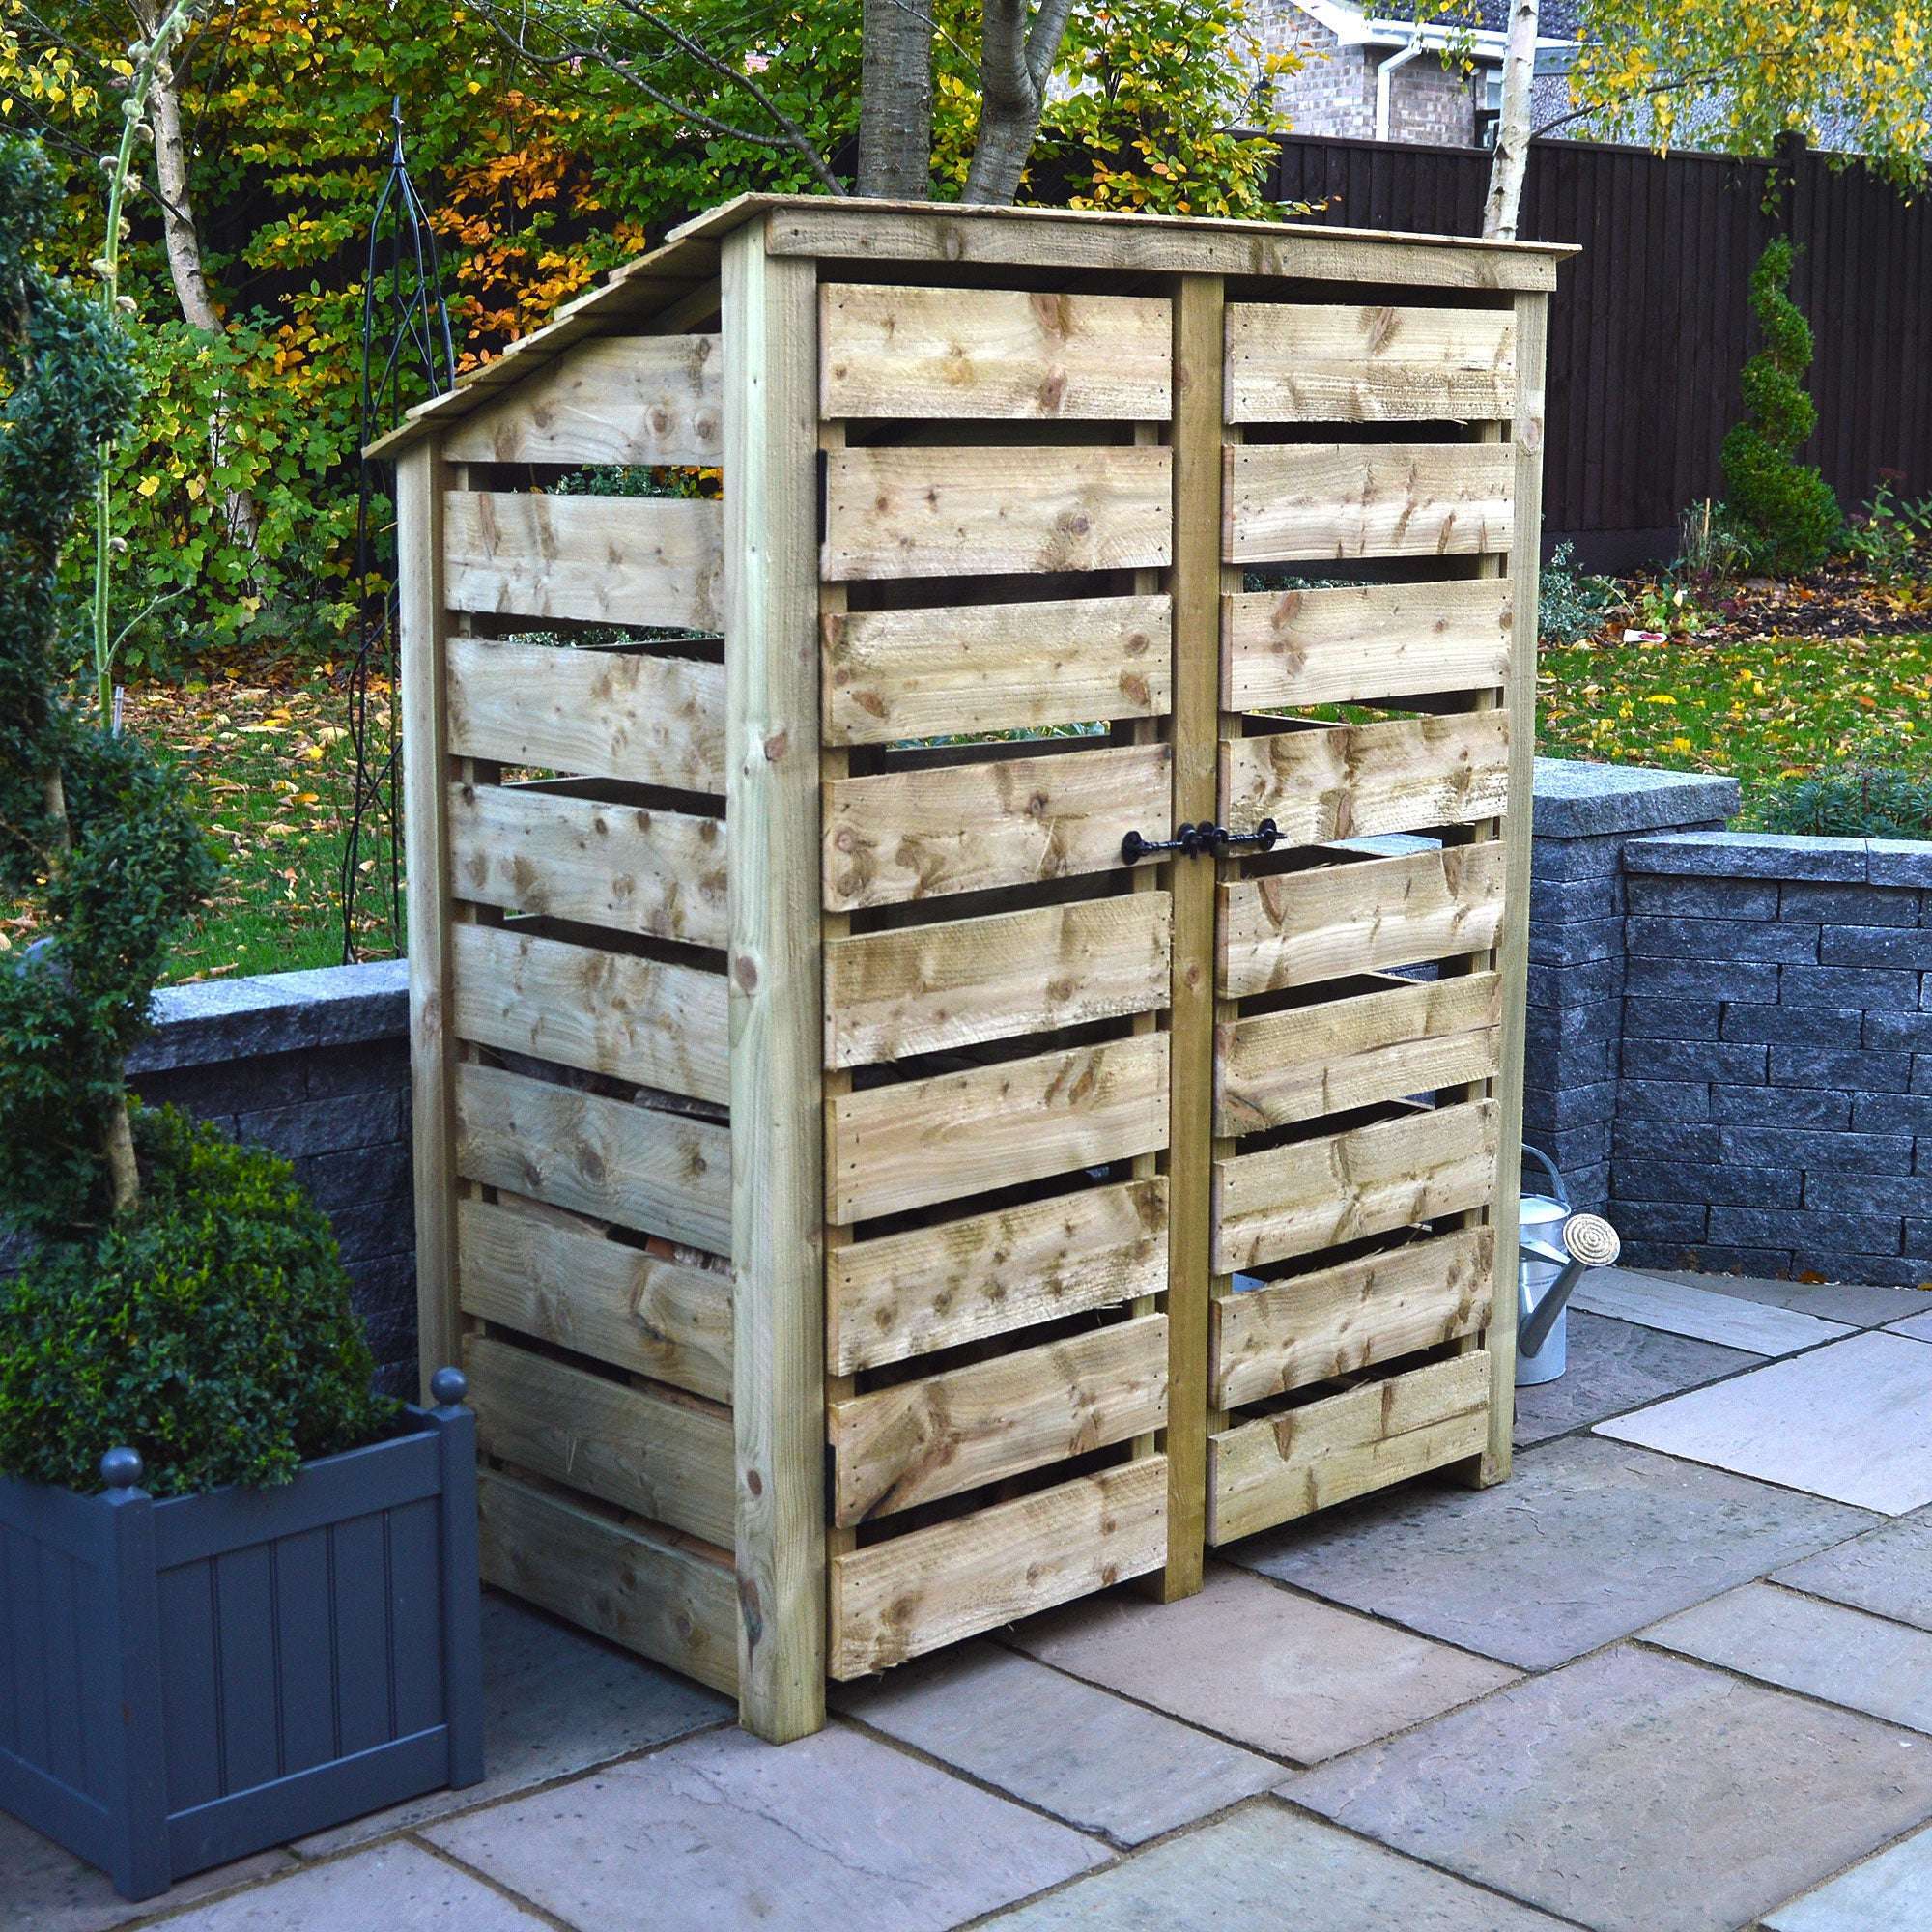 Rutland Country Cottesmore Log Store with Door - 6ft:Rutland County,Exceptional Garden